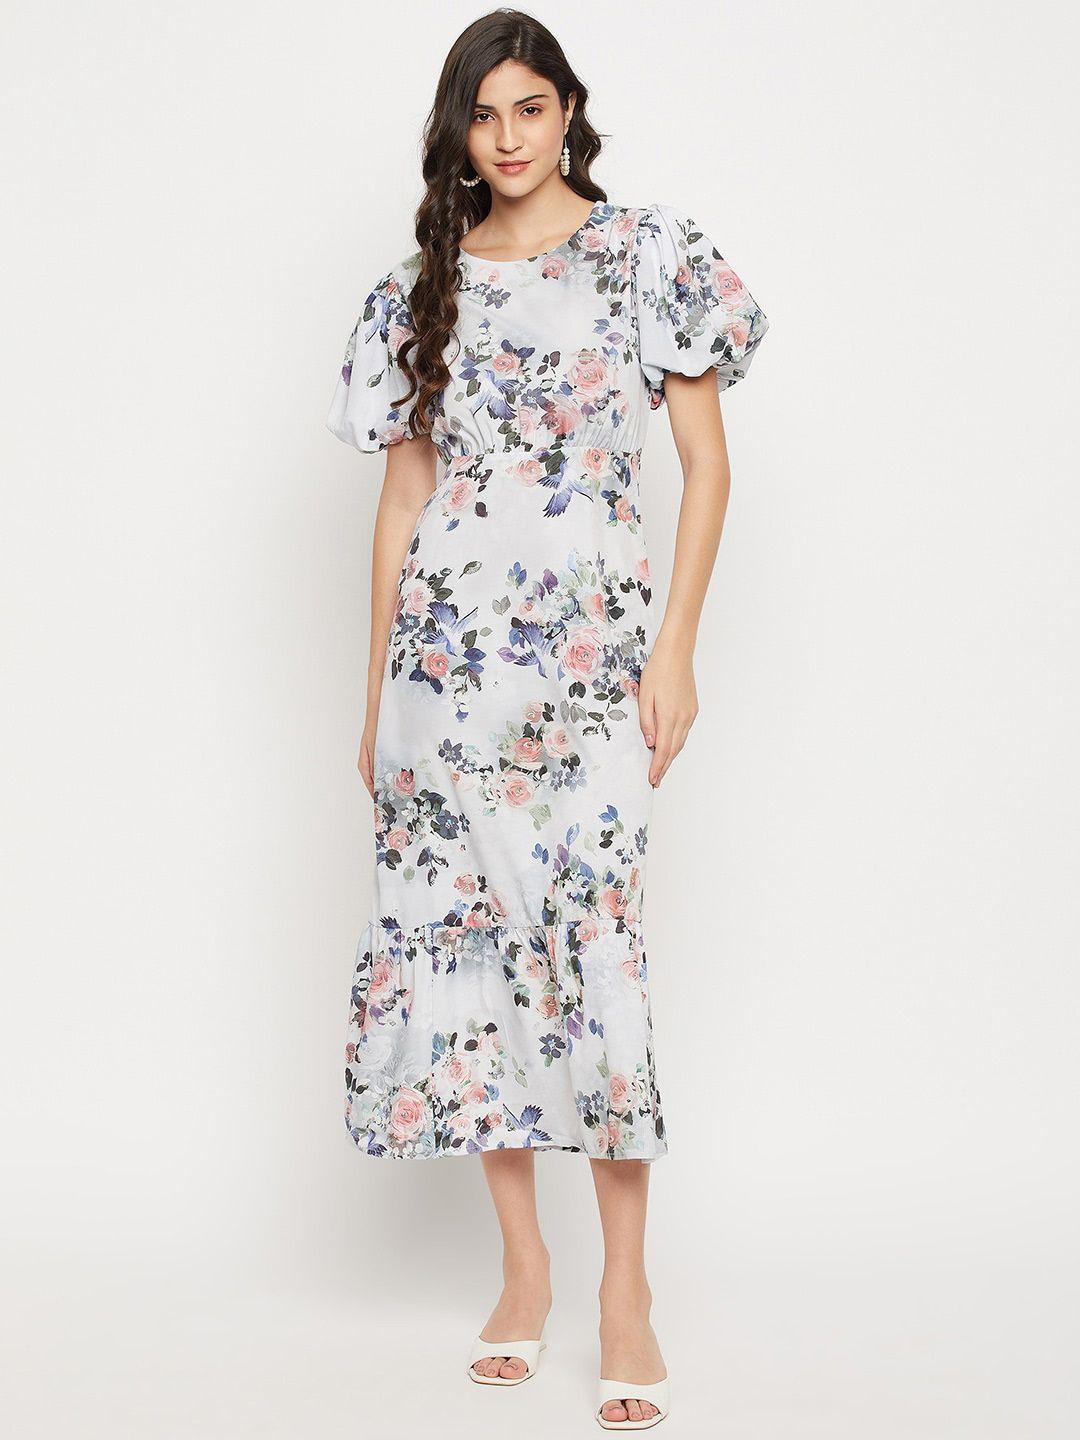 style blush floral printed flared sleeve fit & flare midi dress